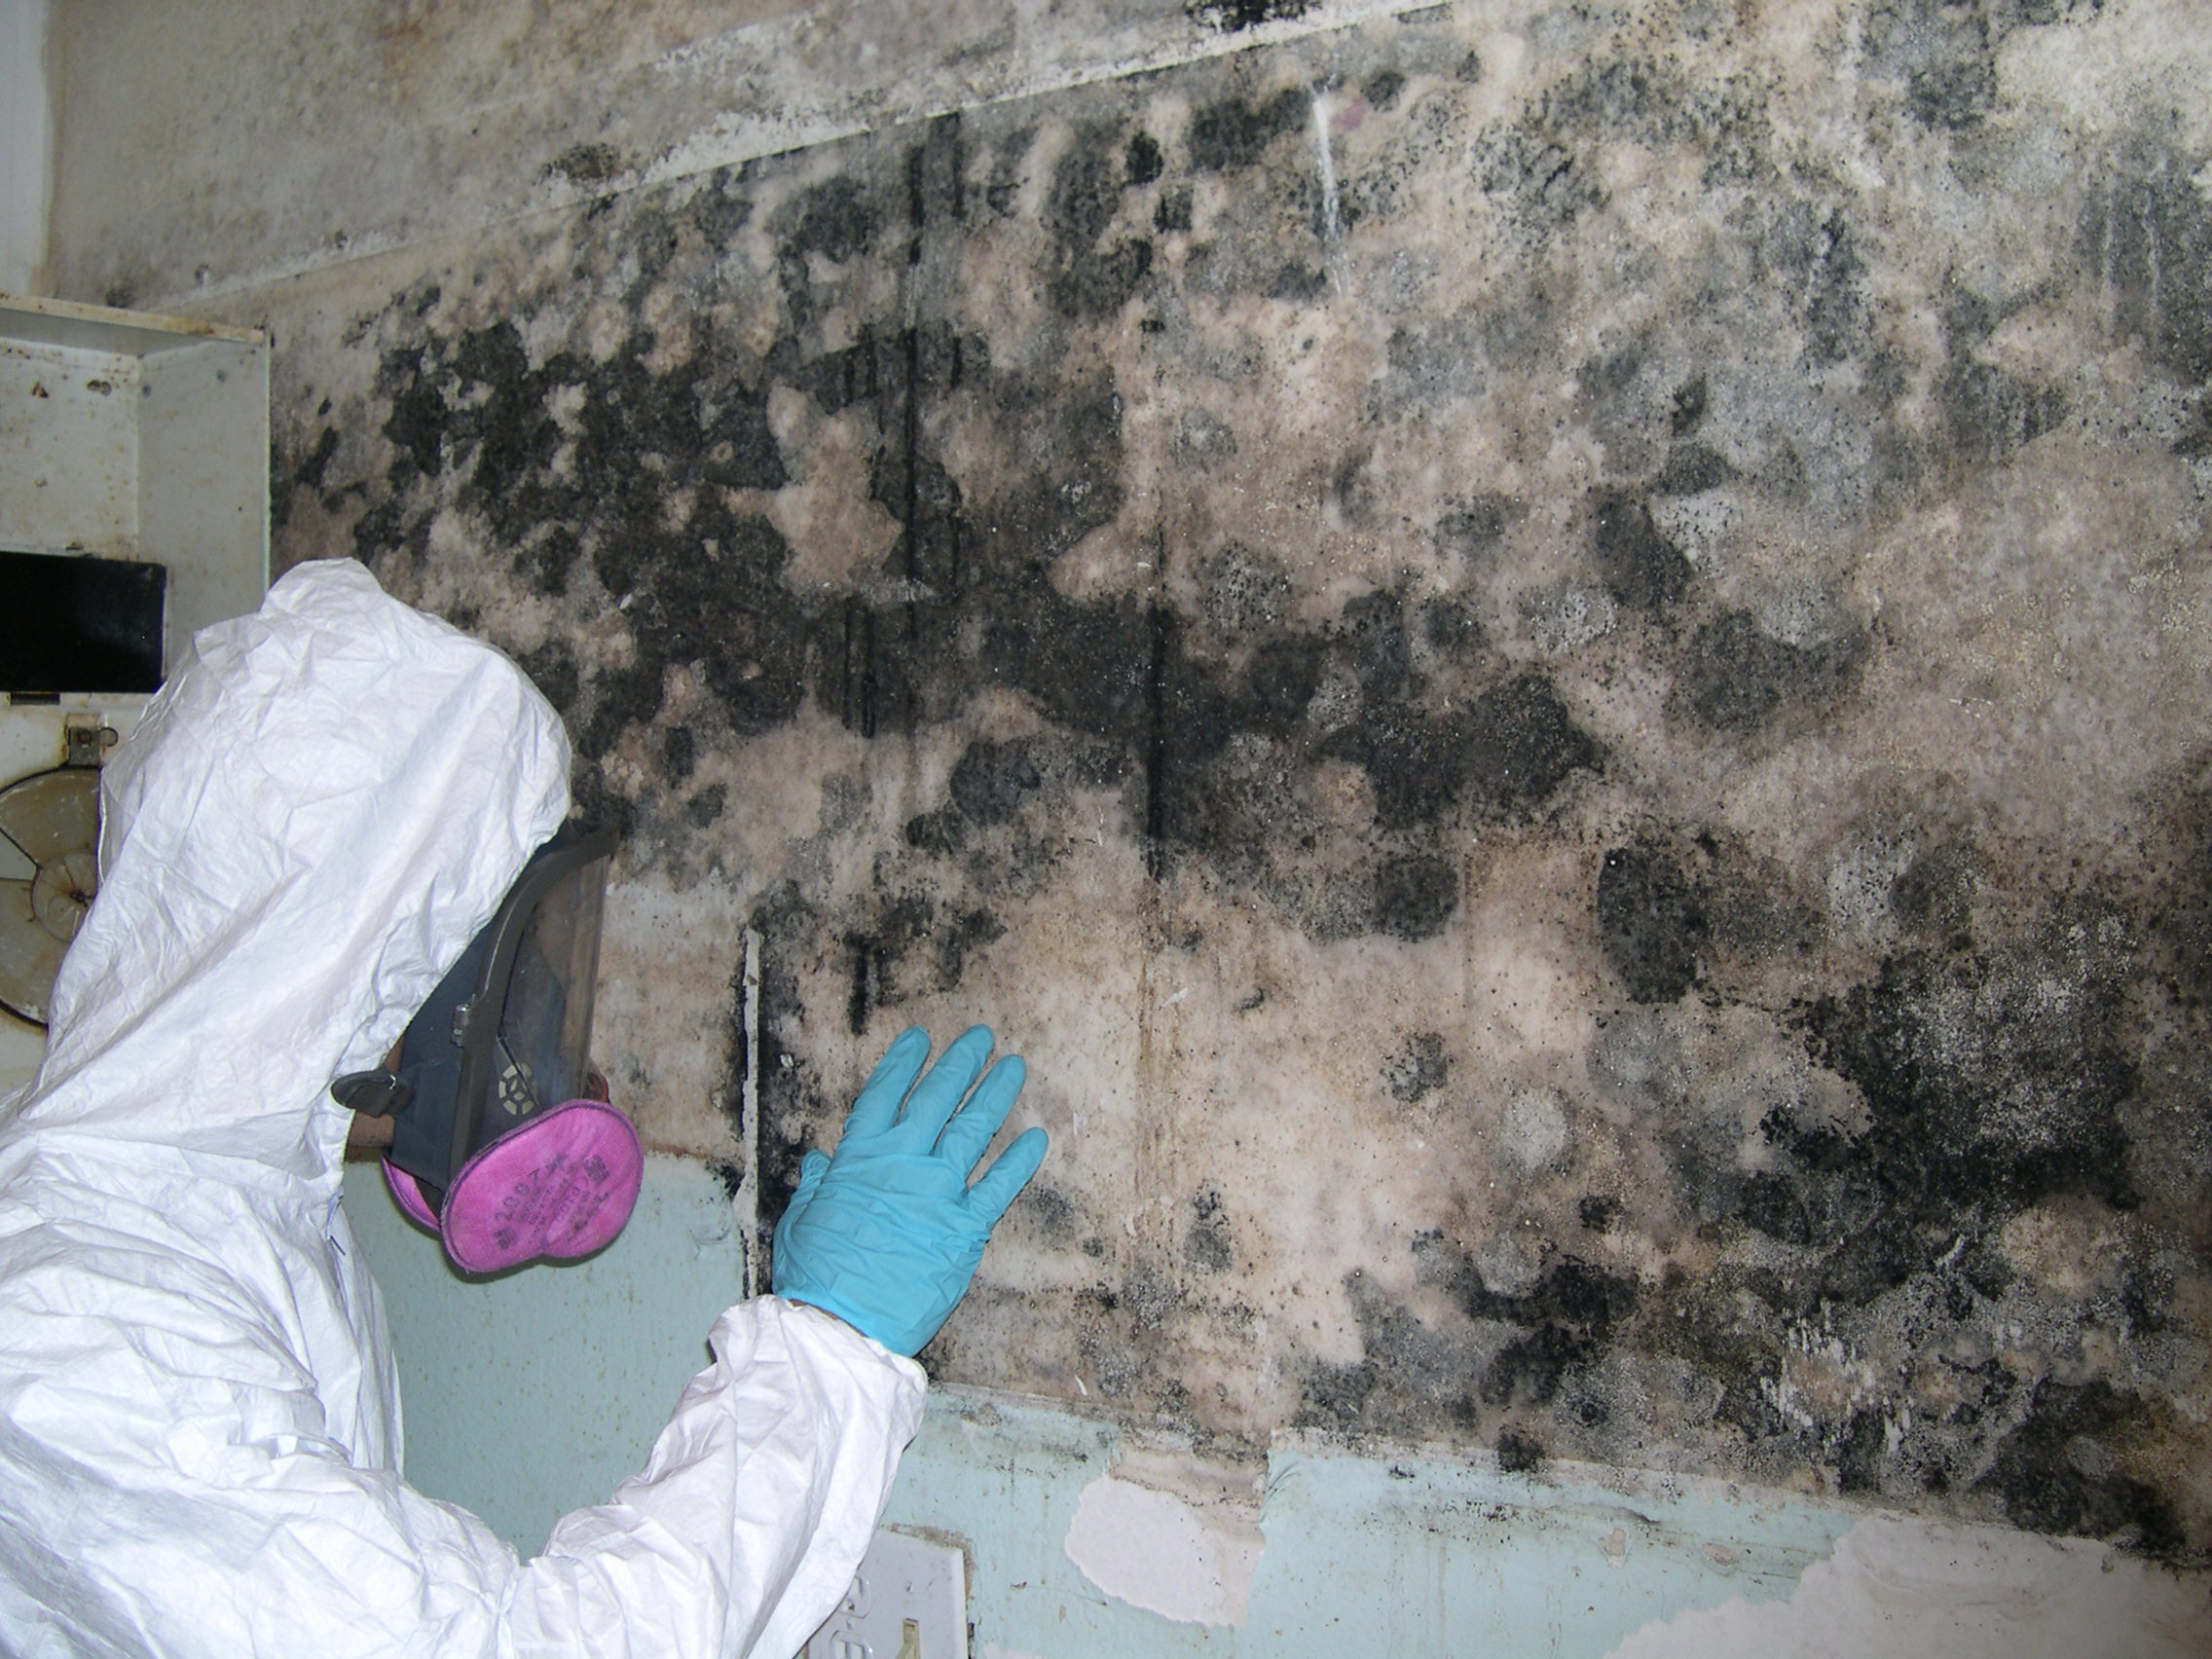 Five Telltale Signs You Should Hire a Mold Remediation Specialist -